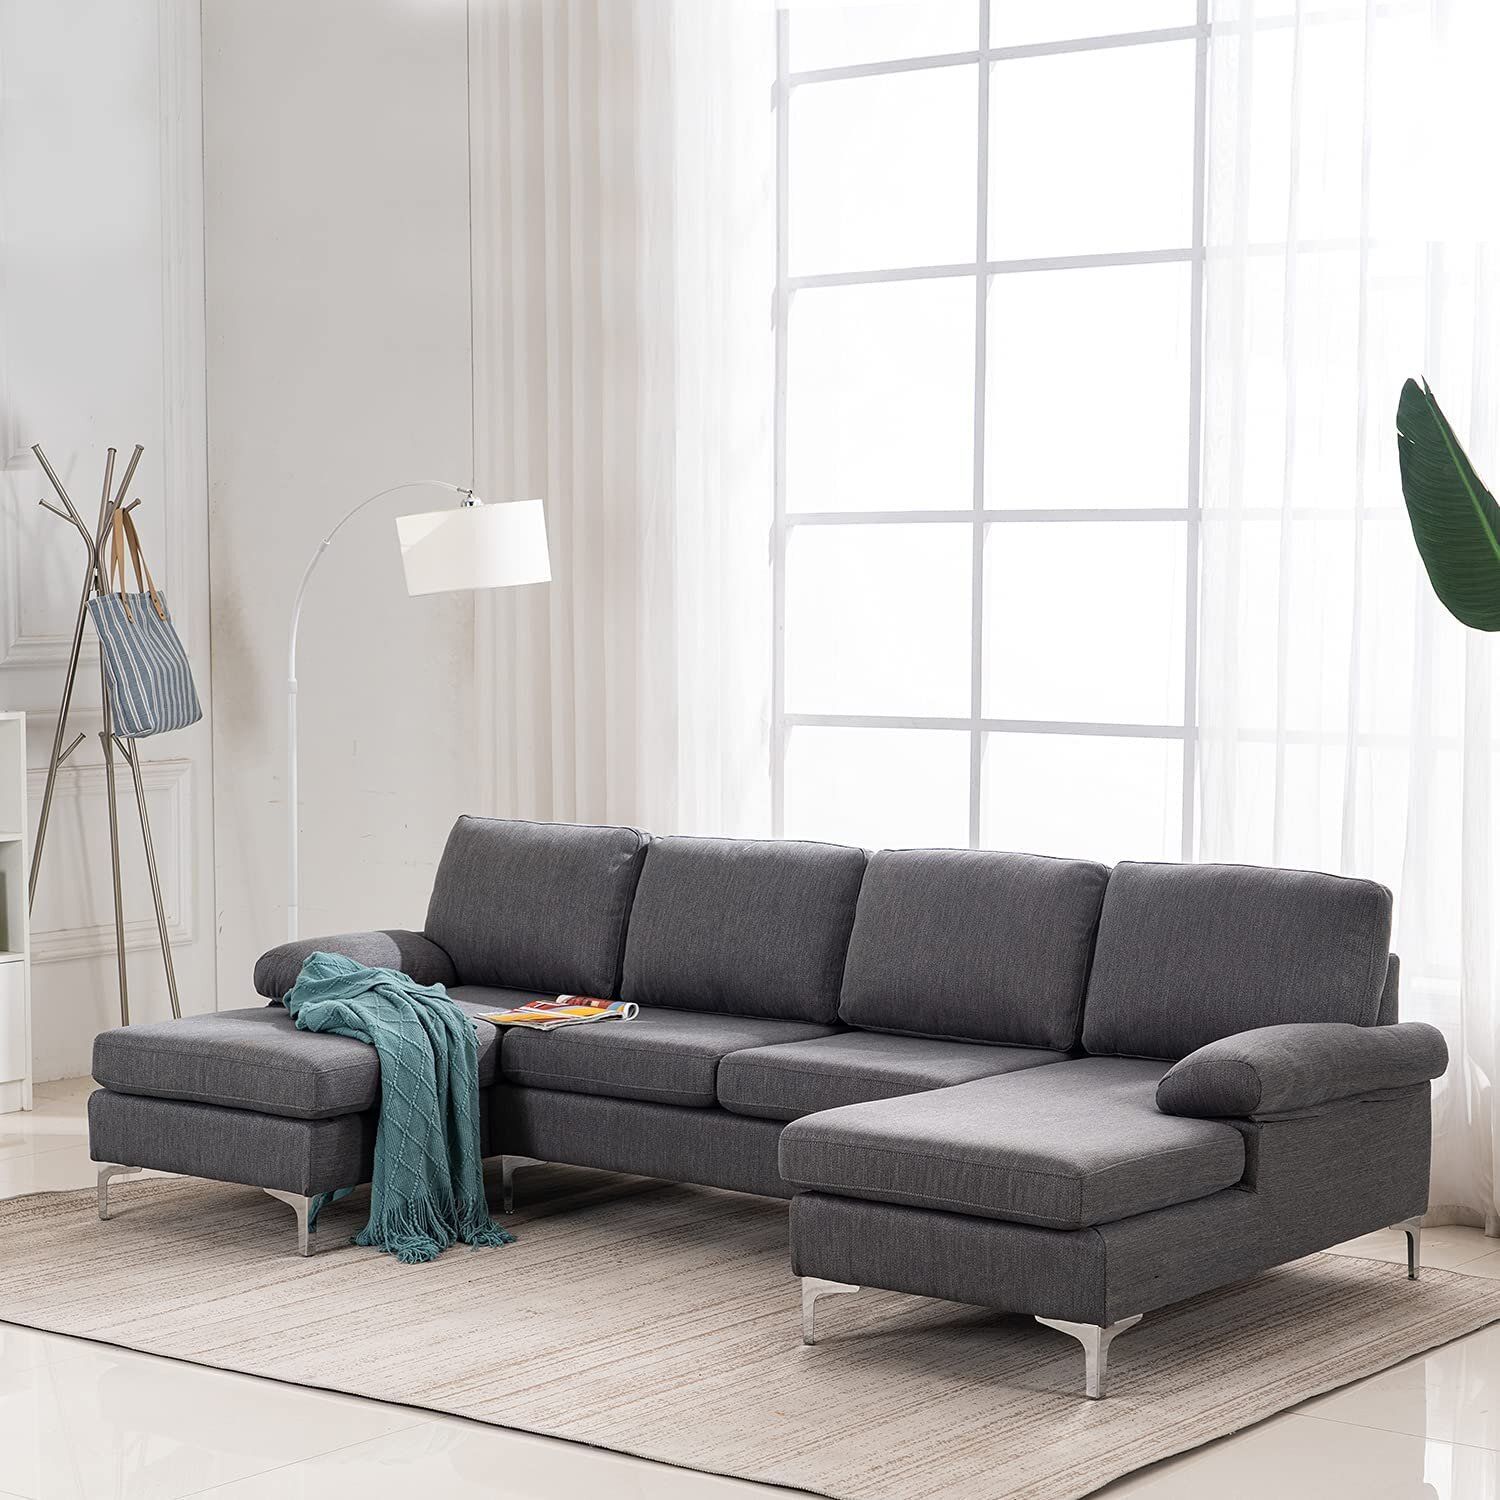 Wrought Studio Bahrije Upholstered Sectional & Reviews | Wayfair Within Studio Sectional Couches (View 5 of 15)